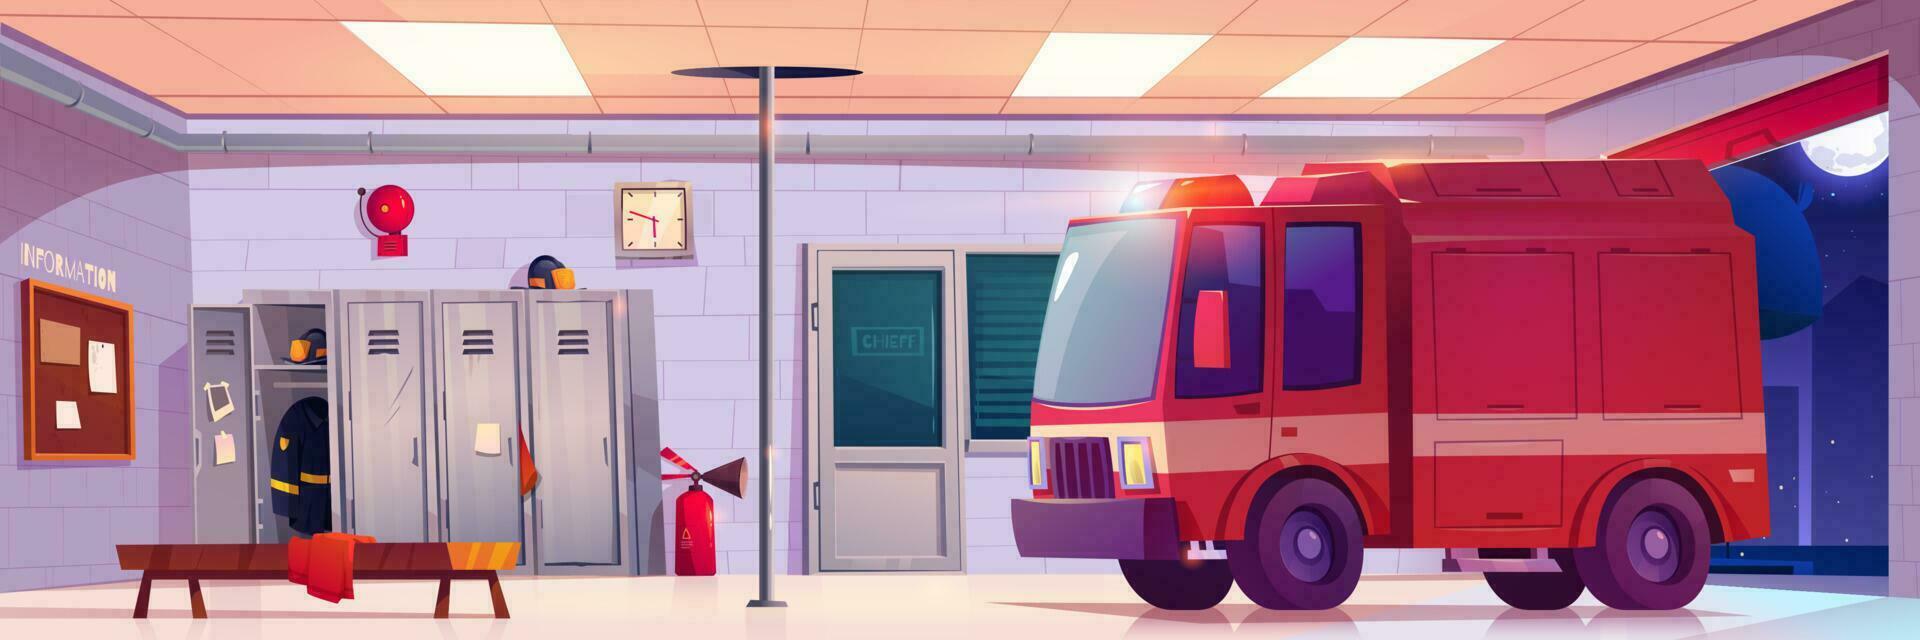 Fire station interior with emergency rescue truck vector